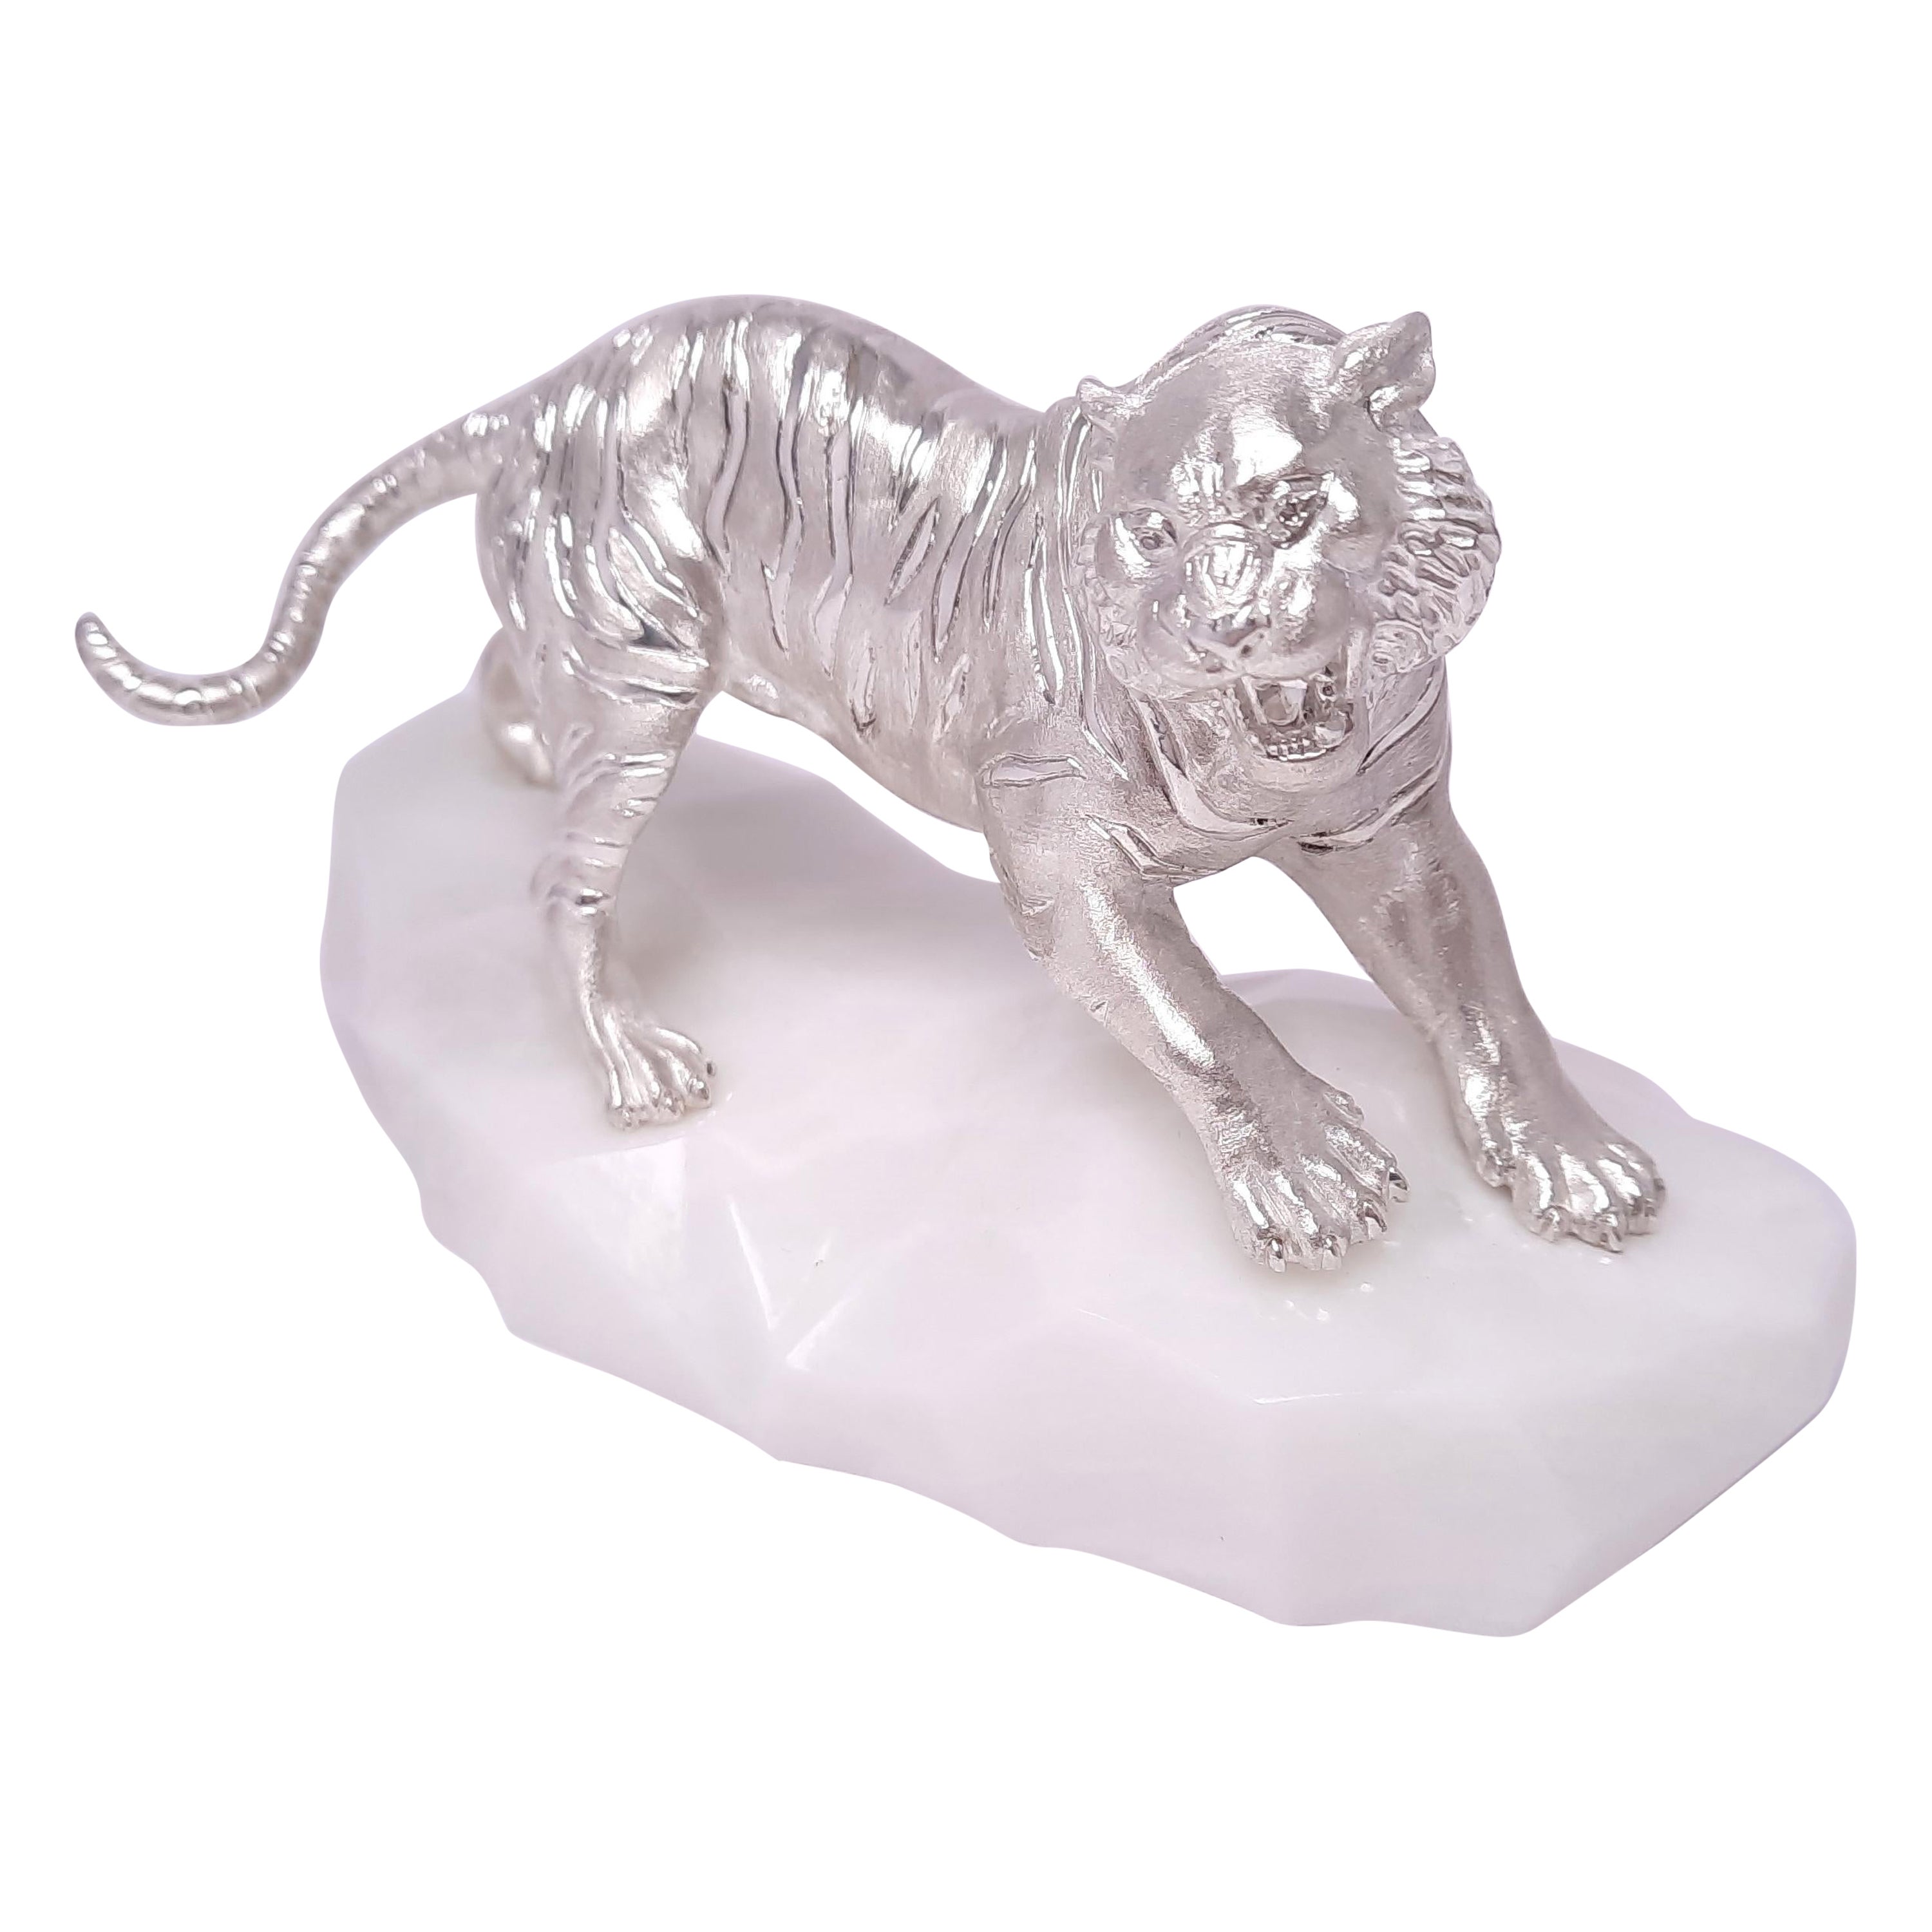 SV925 Tiger Miniature with Rare White Nephrite and Diamond Eyes For Sale